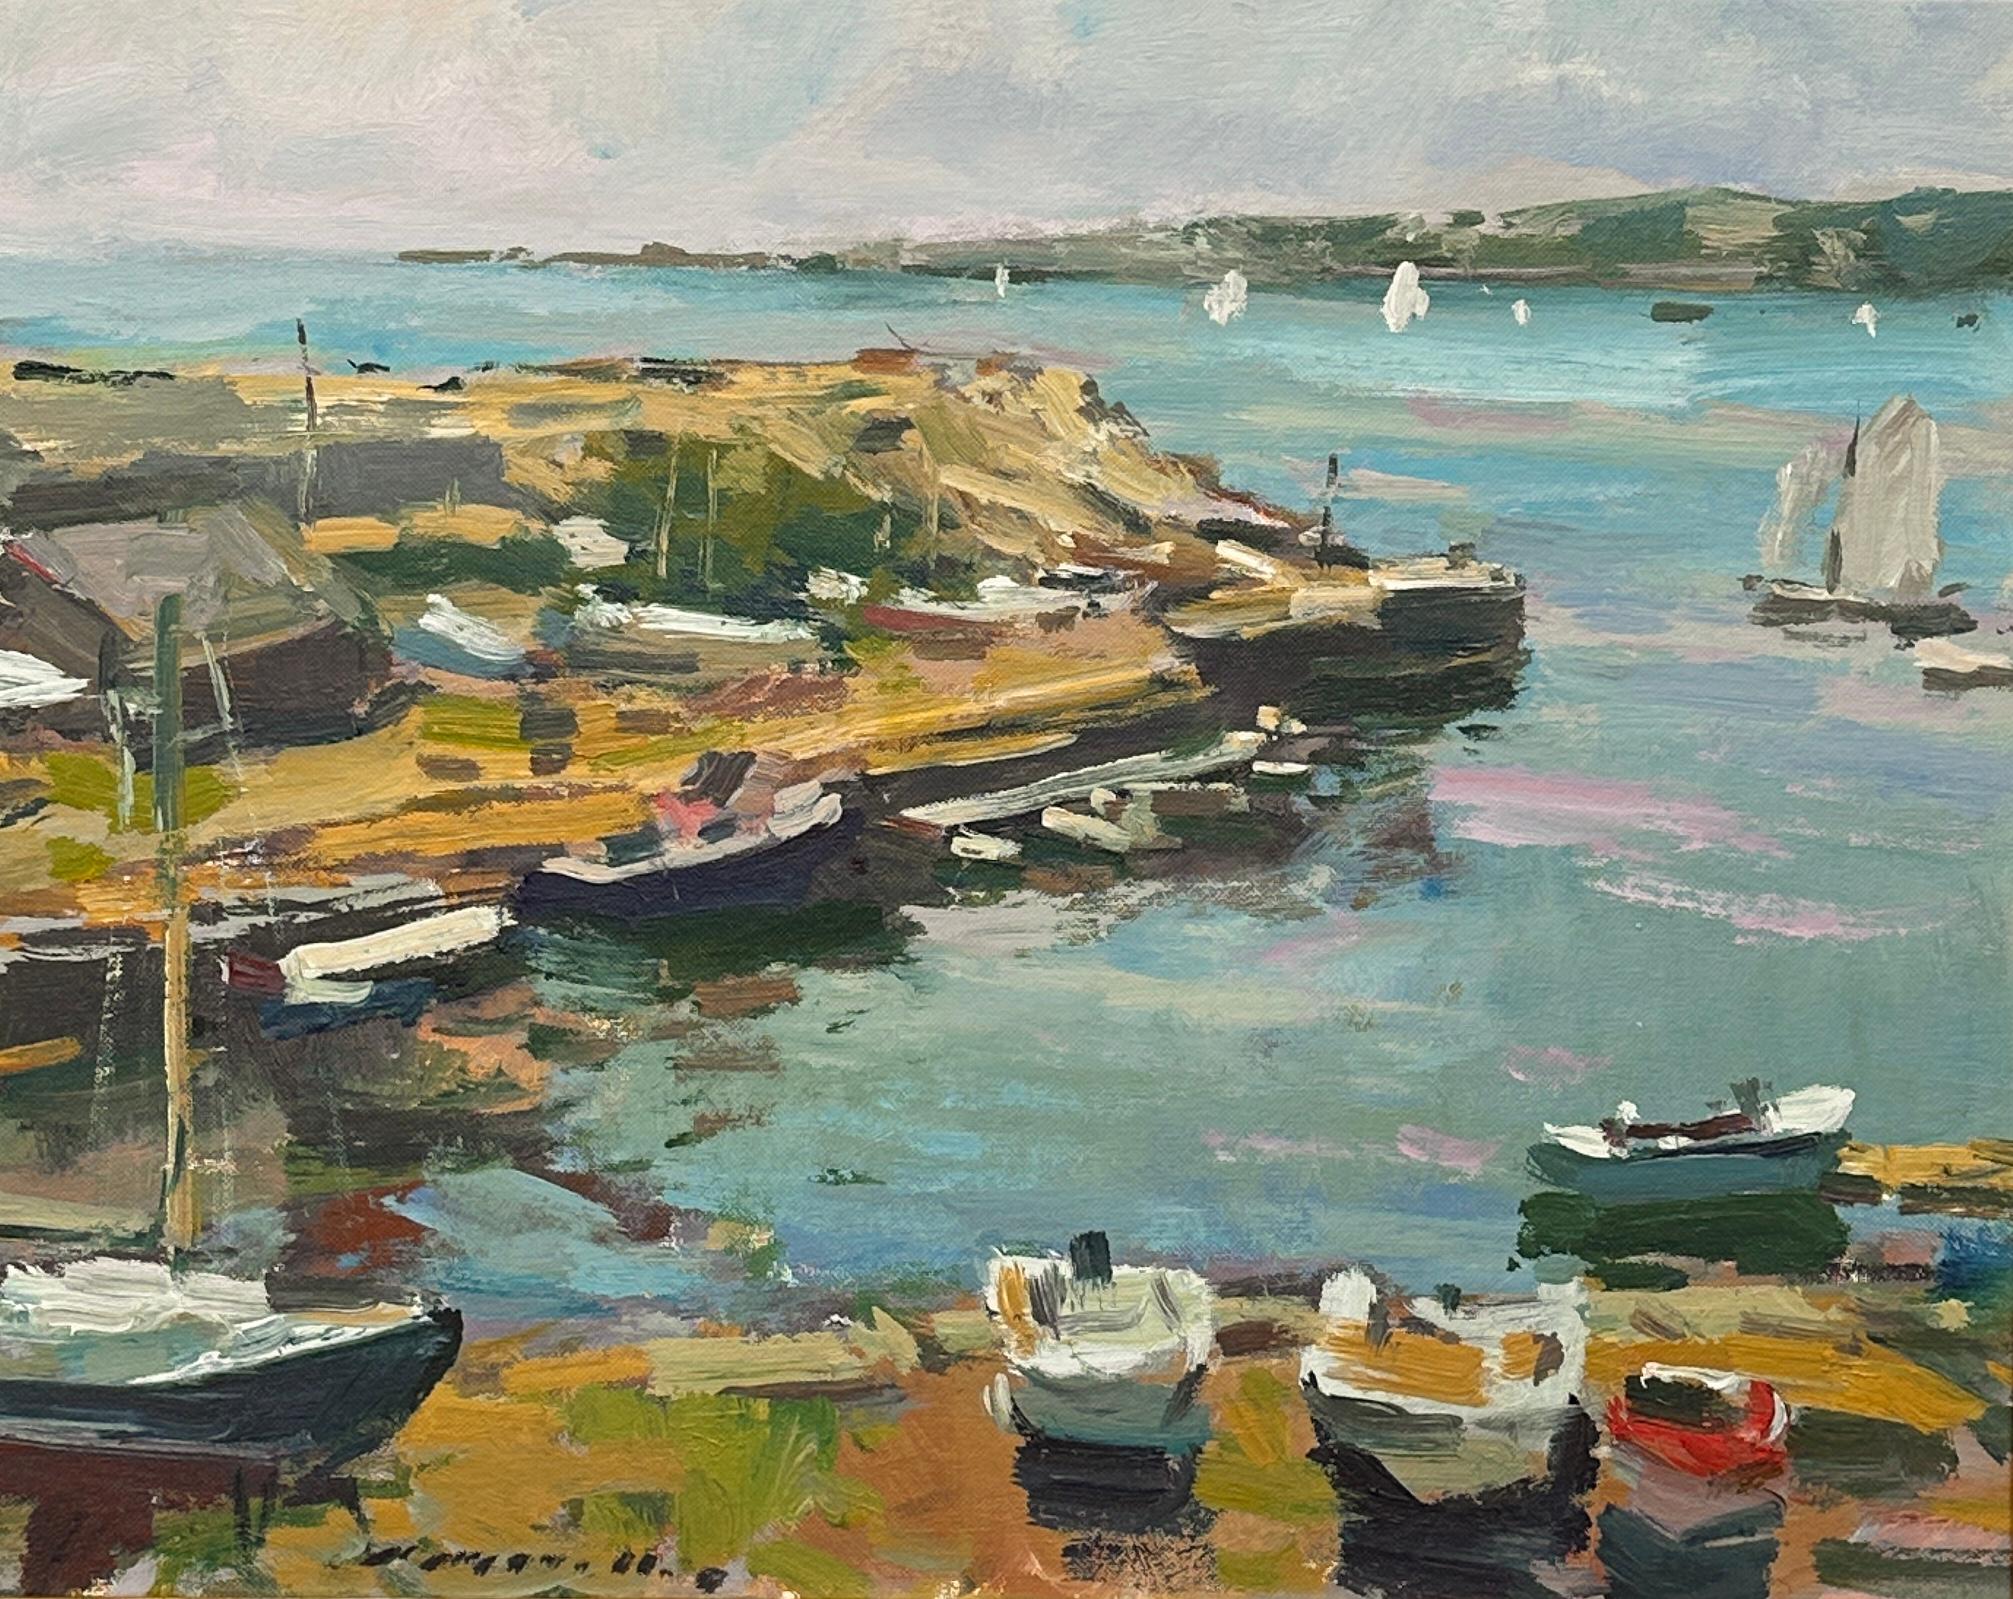 "Pigeon Cove" - Charles Movalli Paintings, Popular Rockport Area, Landscape 